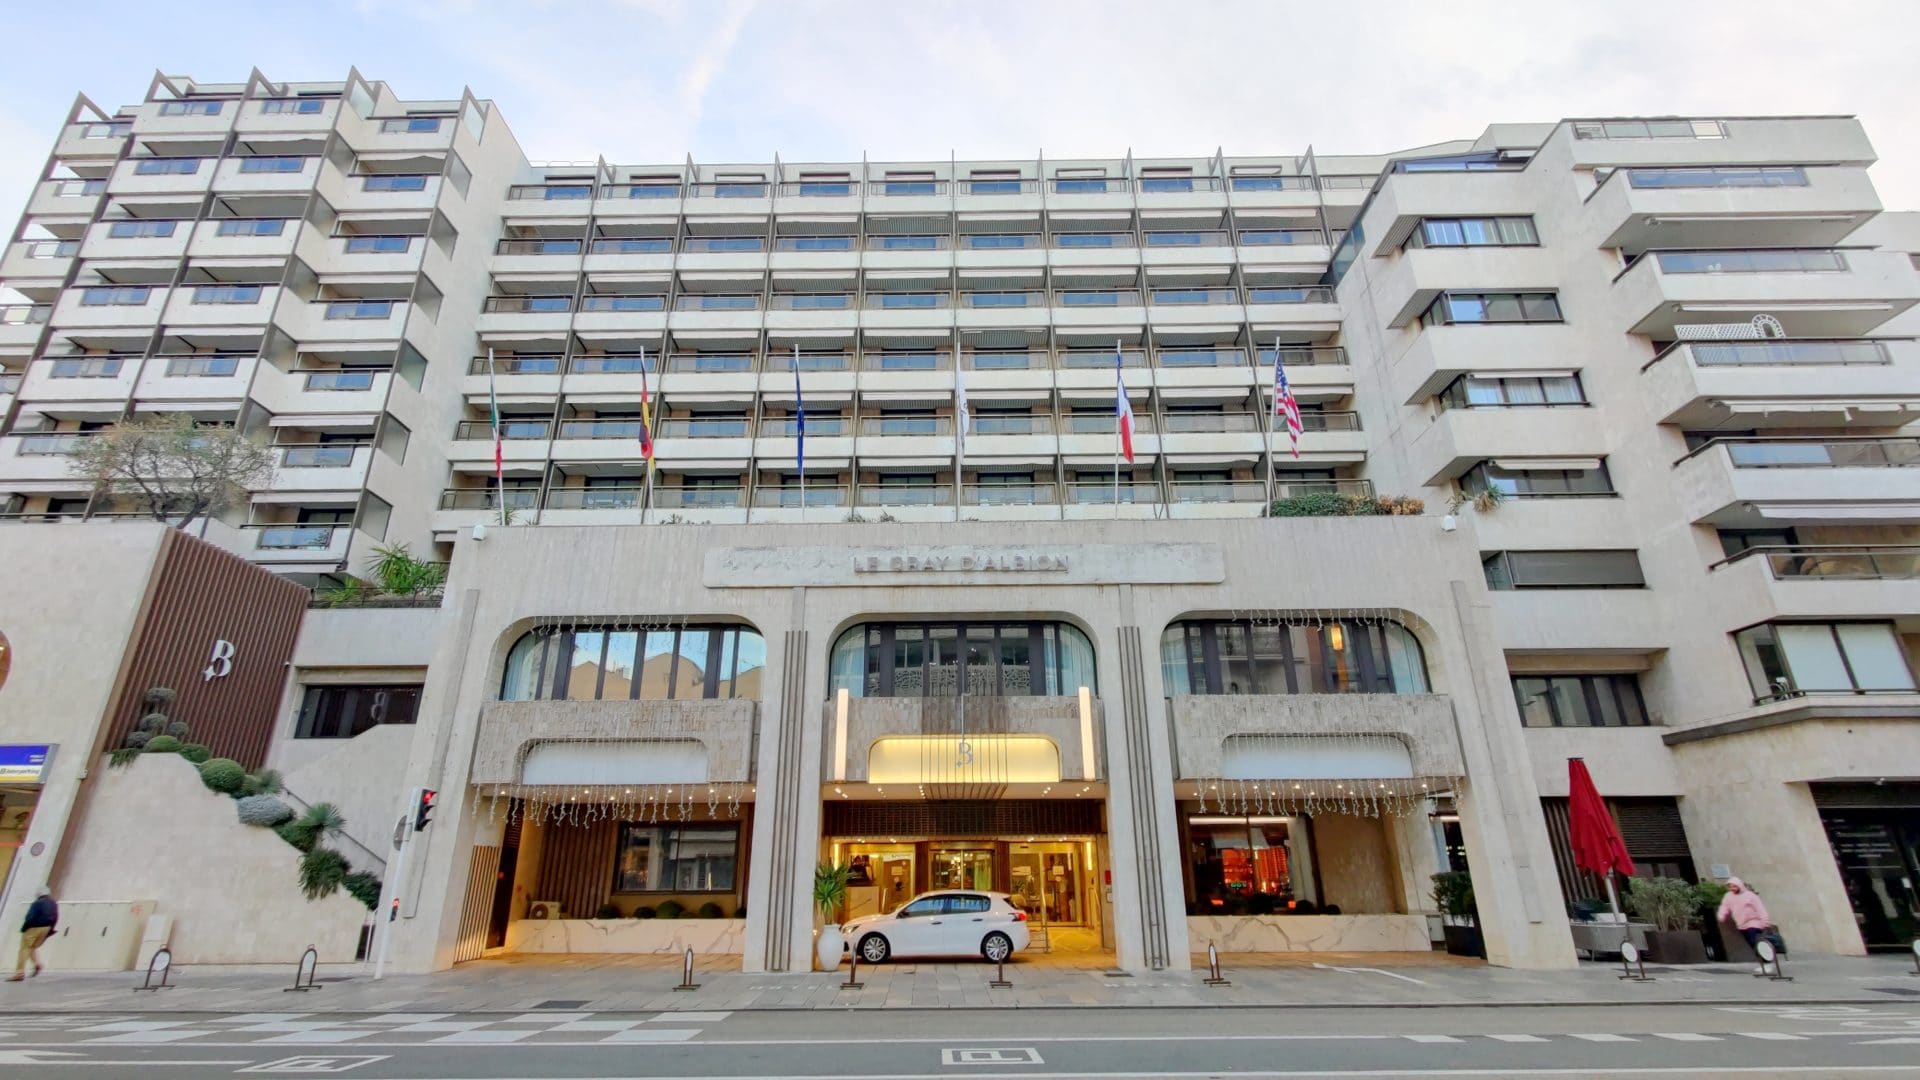 Hotel Barriere Le Gray D'Albion Cannes Gebaeude